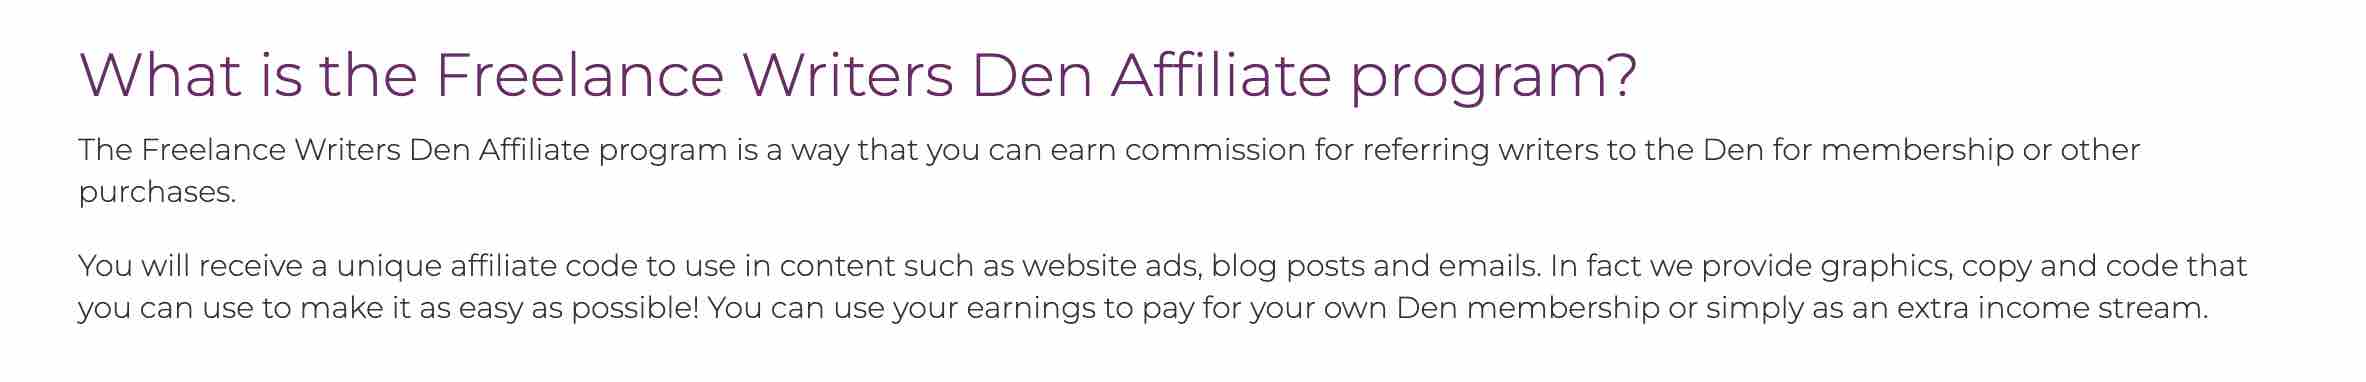 what is Freelance writers den affiliate